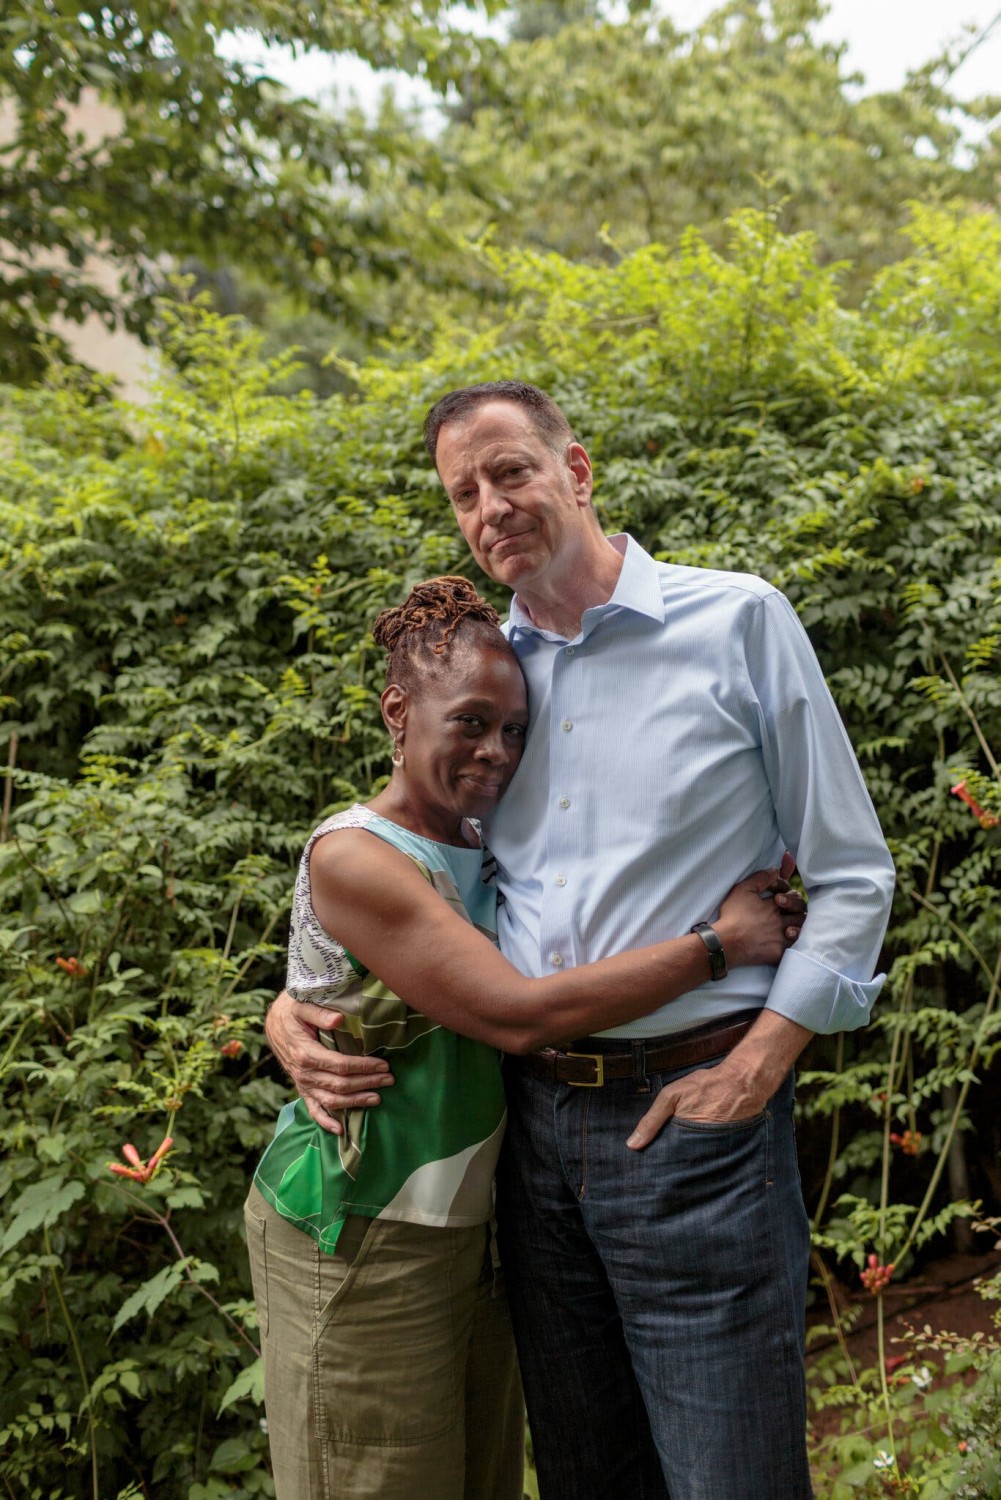 Bill de Blasio and Chirlane McCray, who married in 1994, said they plan to date other people. “You can feel when things are off,” Mr. de Blasio said.Credit...Sarah Blesener for The New York Times